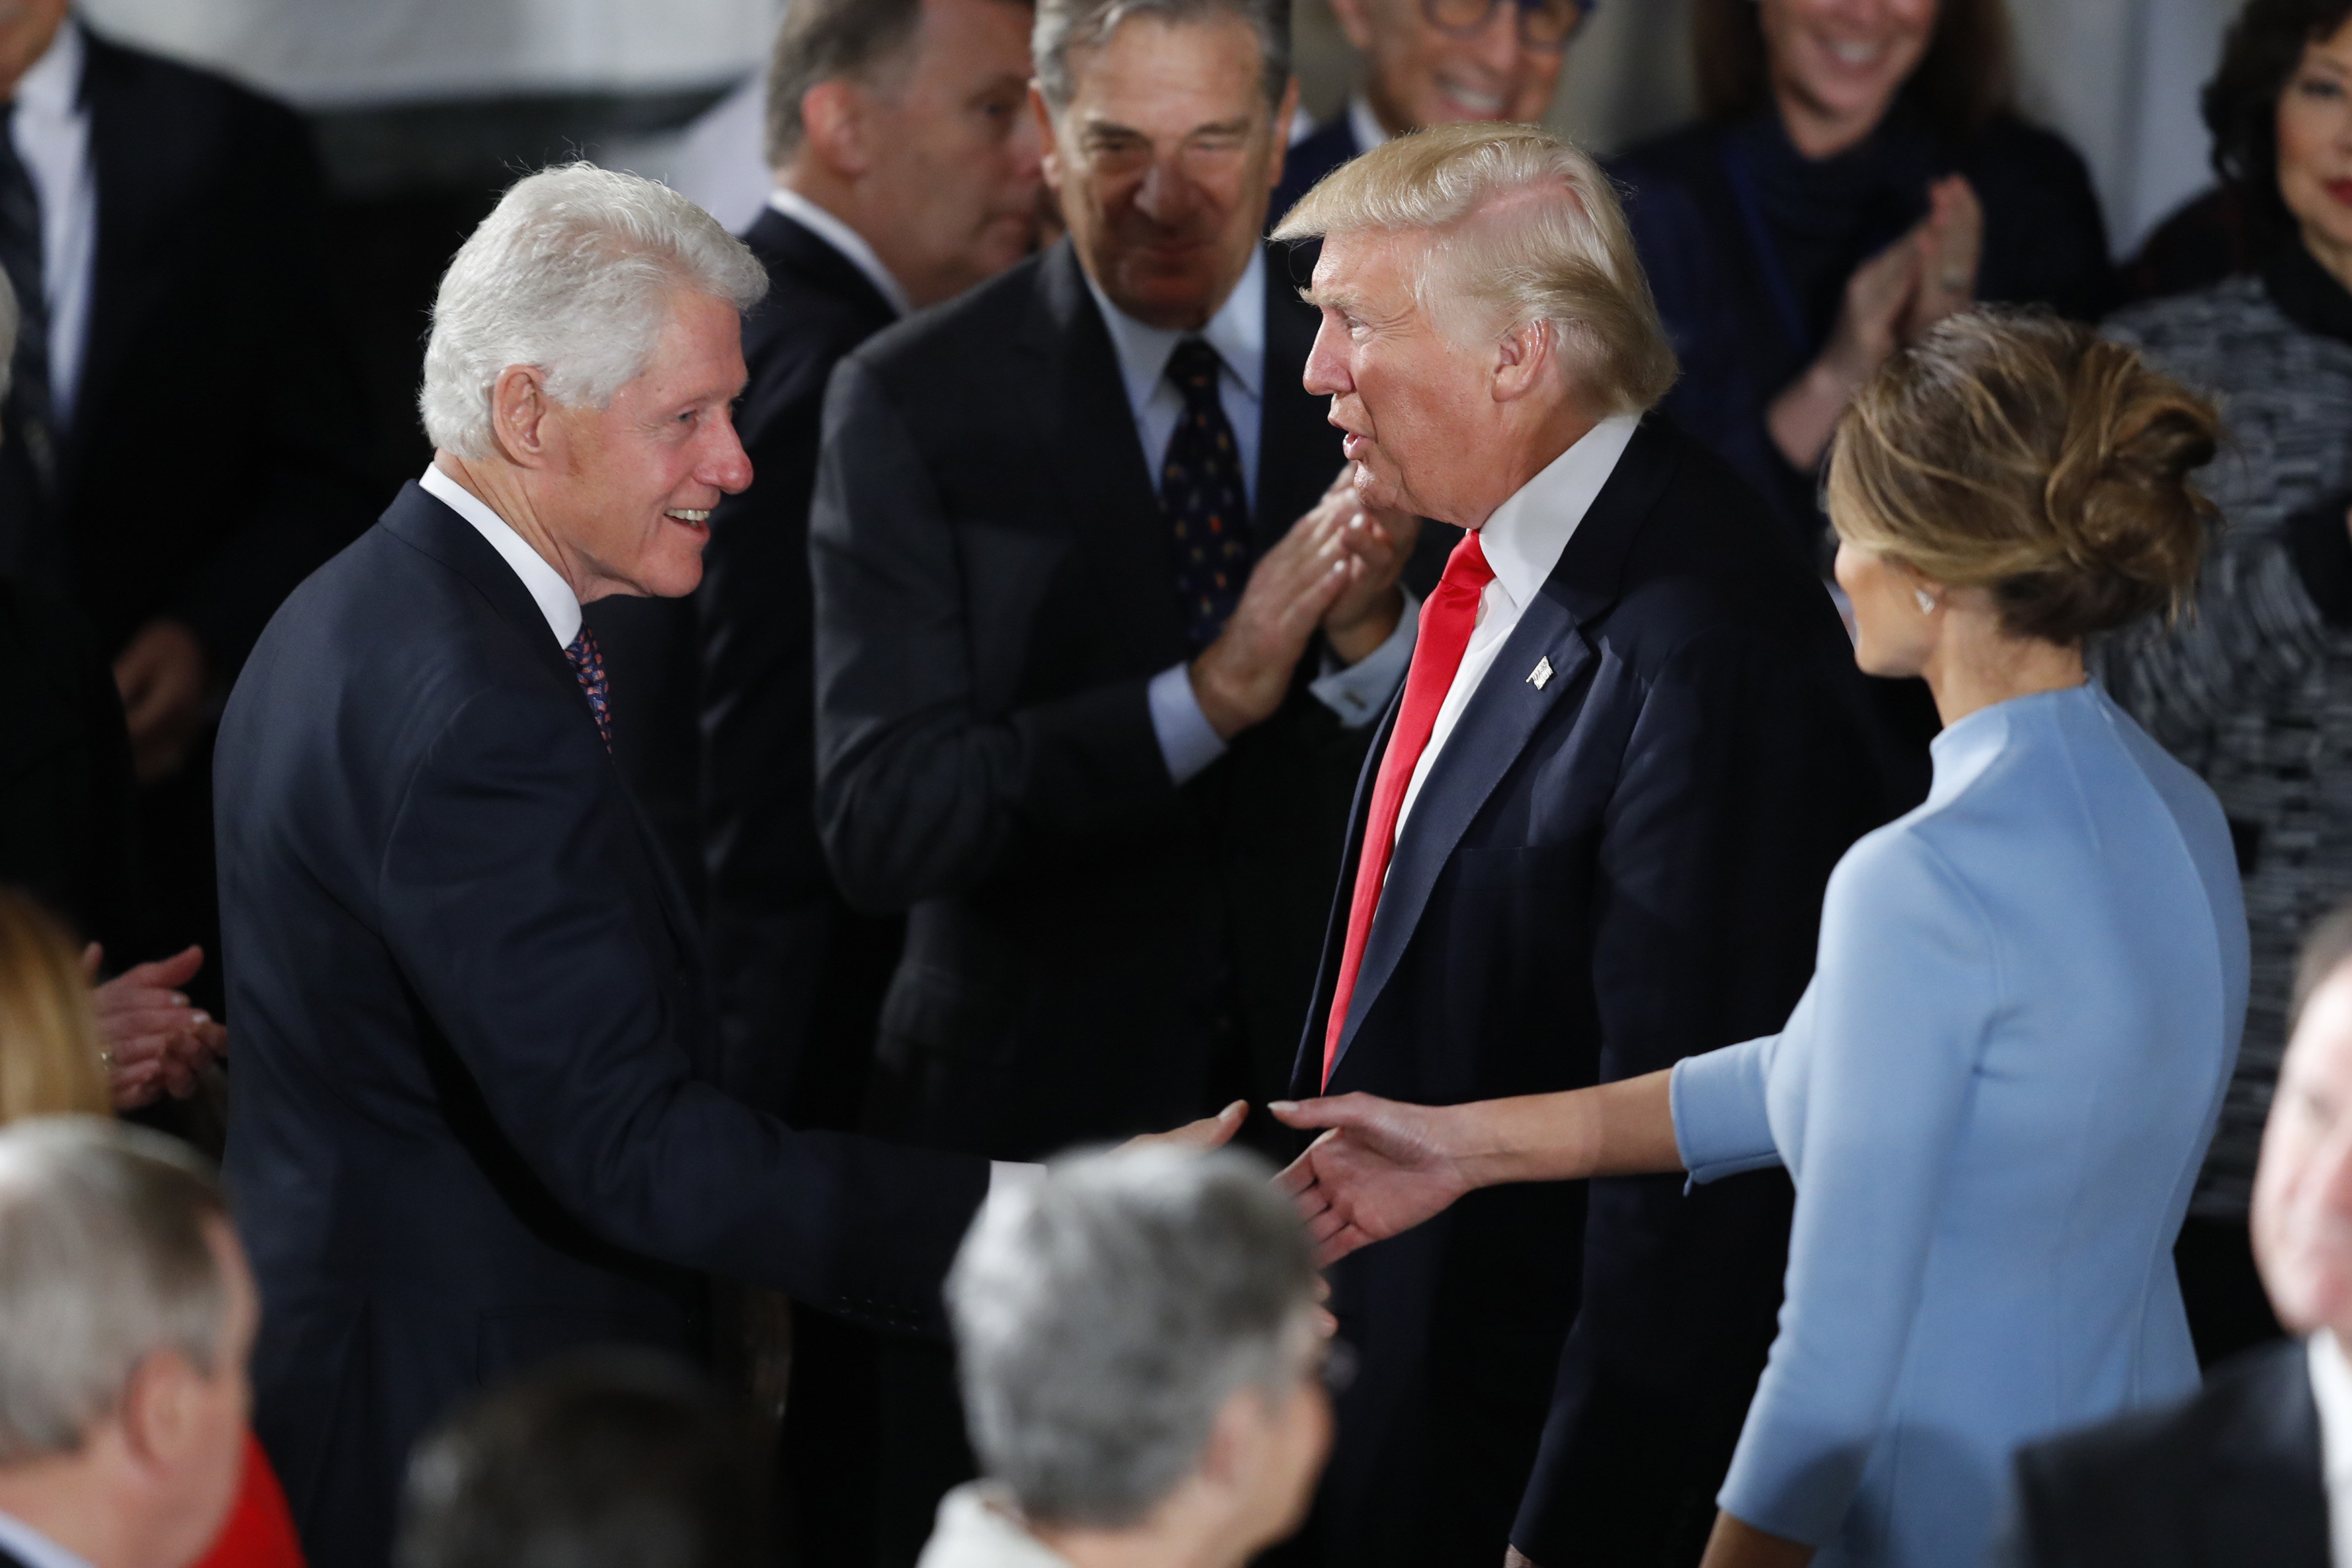 President Donald Trump and first lady Melania Trump greet former President Bill Clinton at the Inaugural Luncheon in the US Capitol January 20, 2017 in Washington, DC. President Trump will attend the luncheon along with other dignitaries after being sworn in as the 45th President of the United States. (Photo by Aaron P. Bernstein/Getty Images)